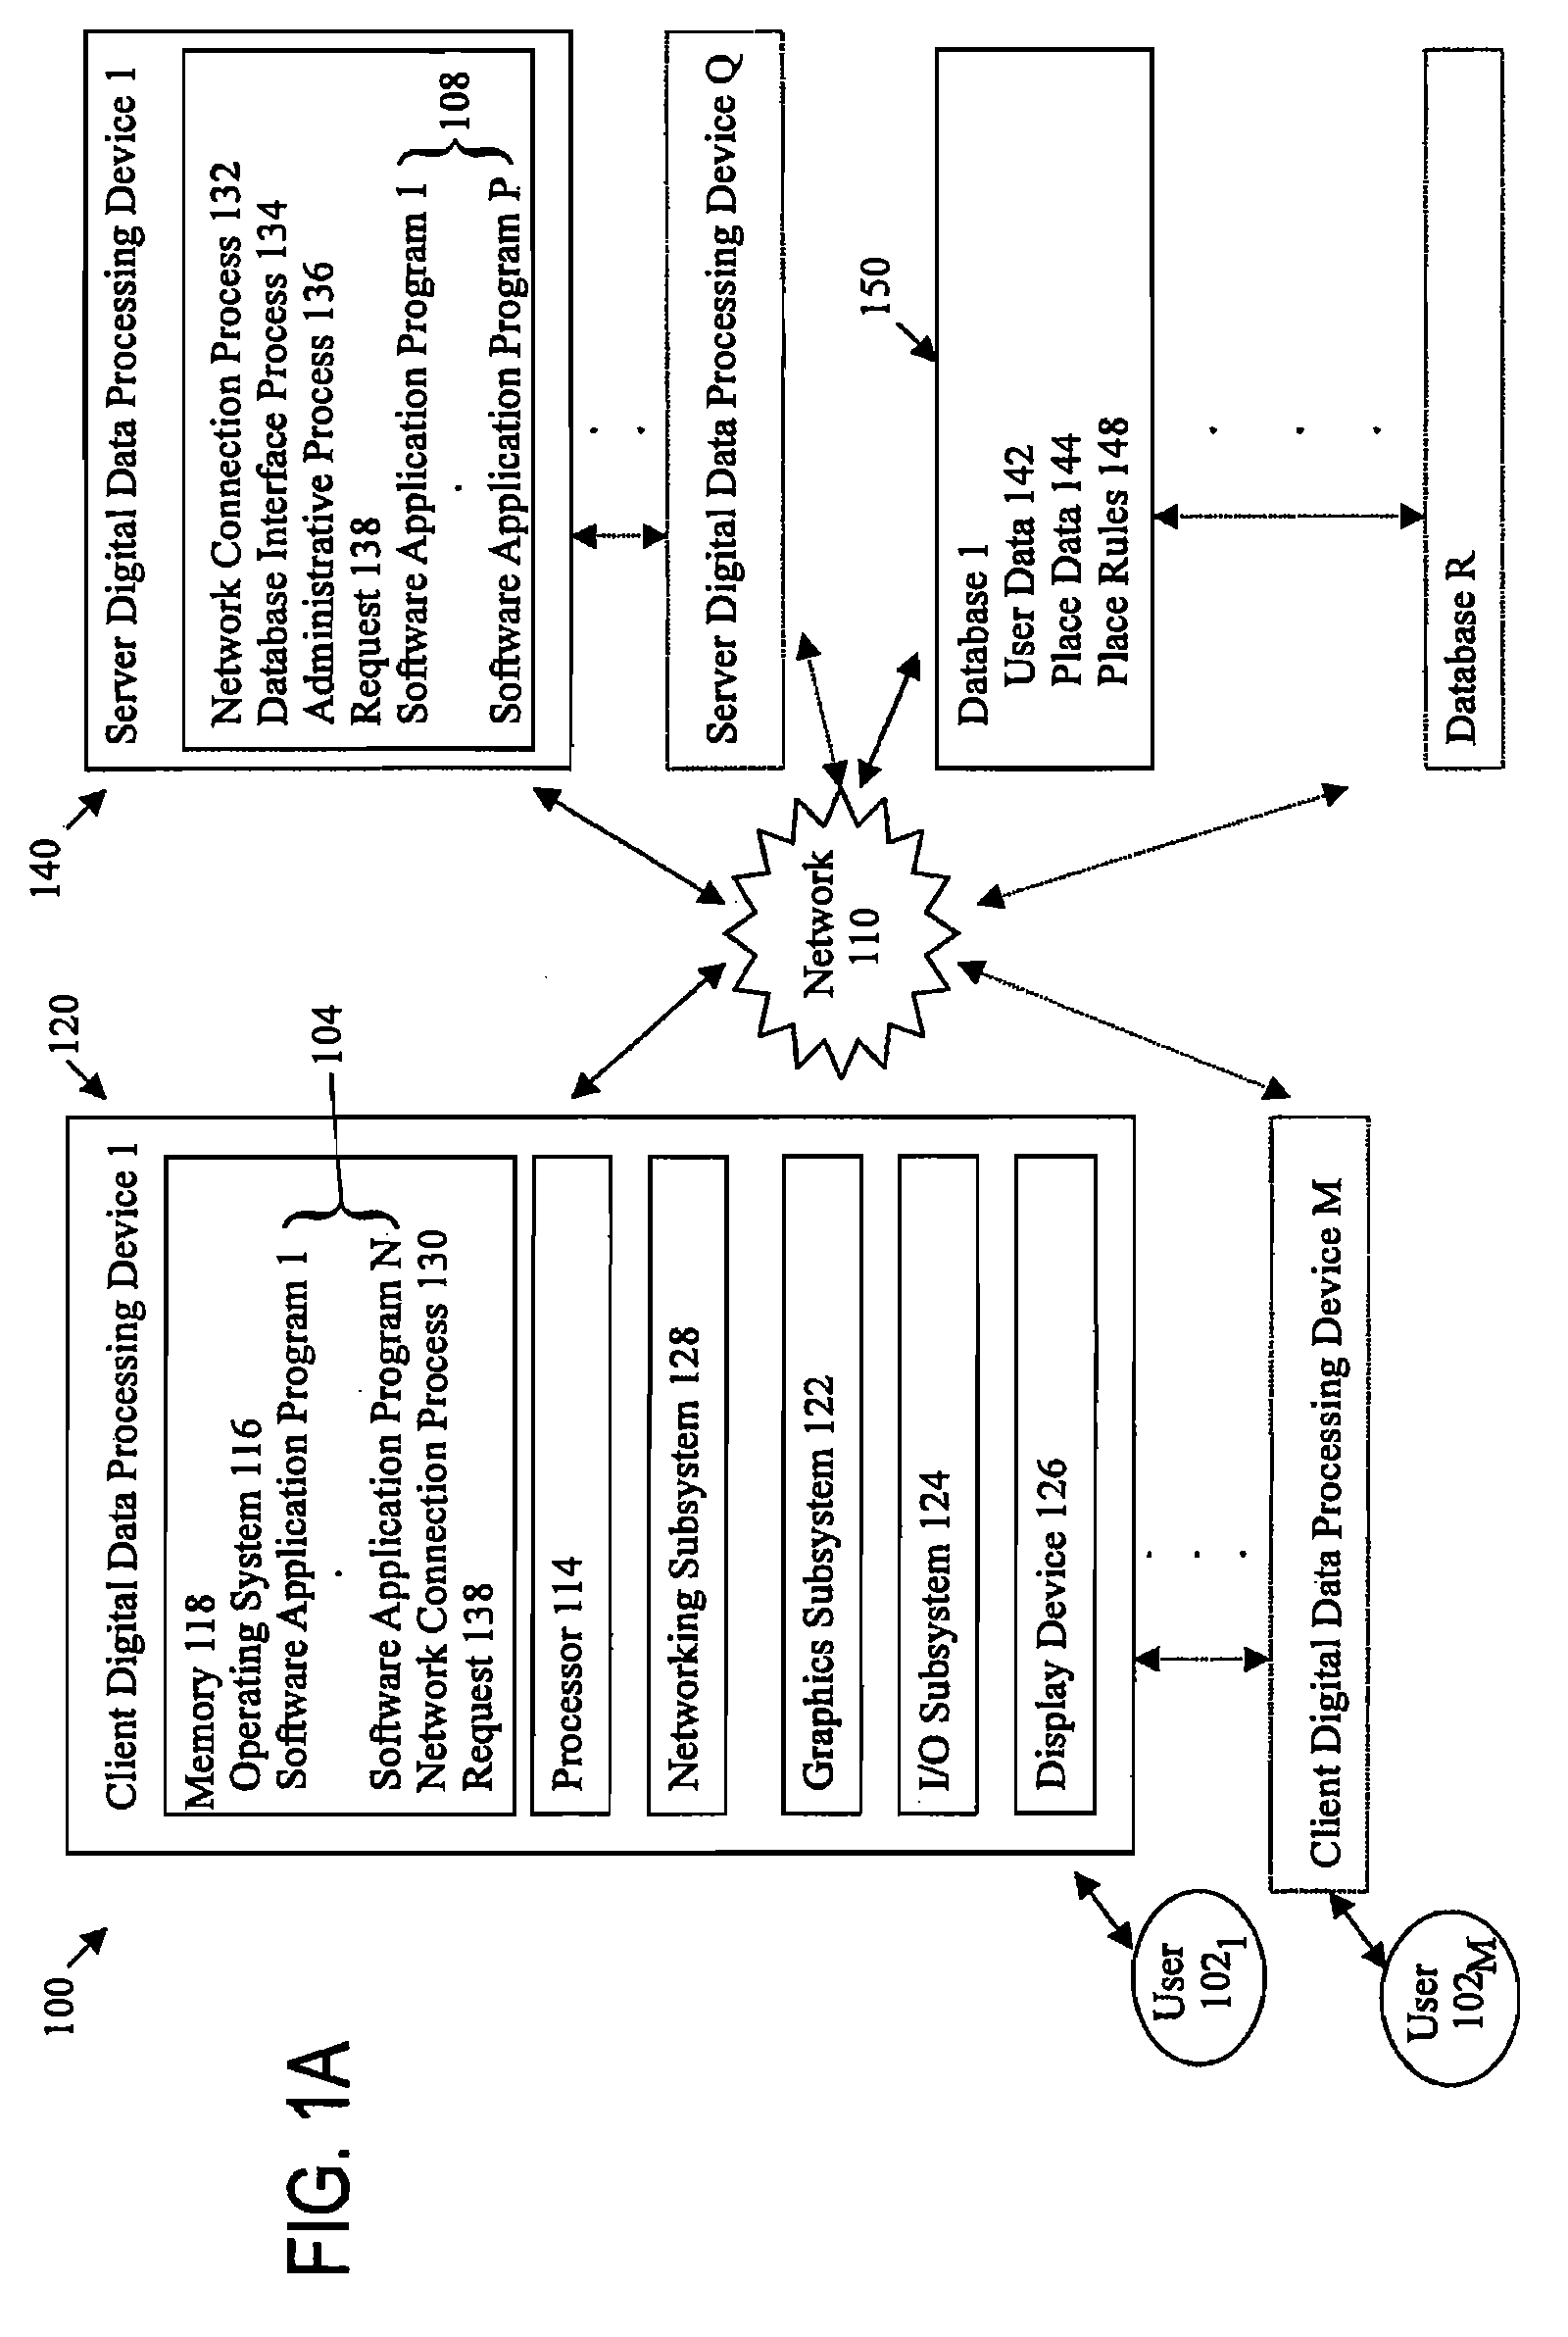 Systems and methods for providing a collaboration place interface including data that is persistent after a client is longer in the collaboration place among a plurality of clients